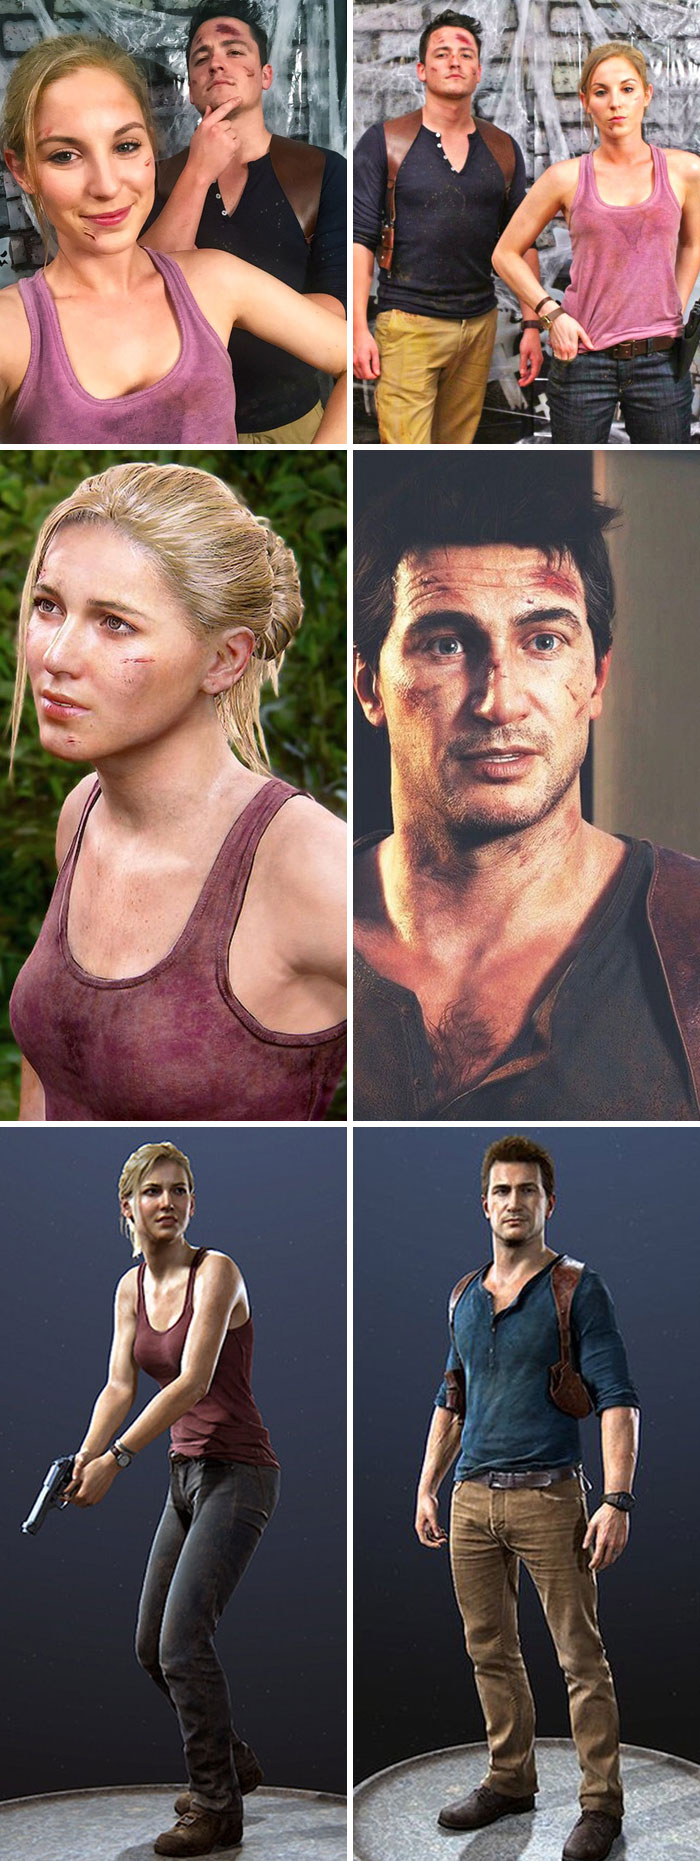 My Girlfriend And I Attempted 'Uncharted 4' This Halloween